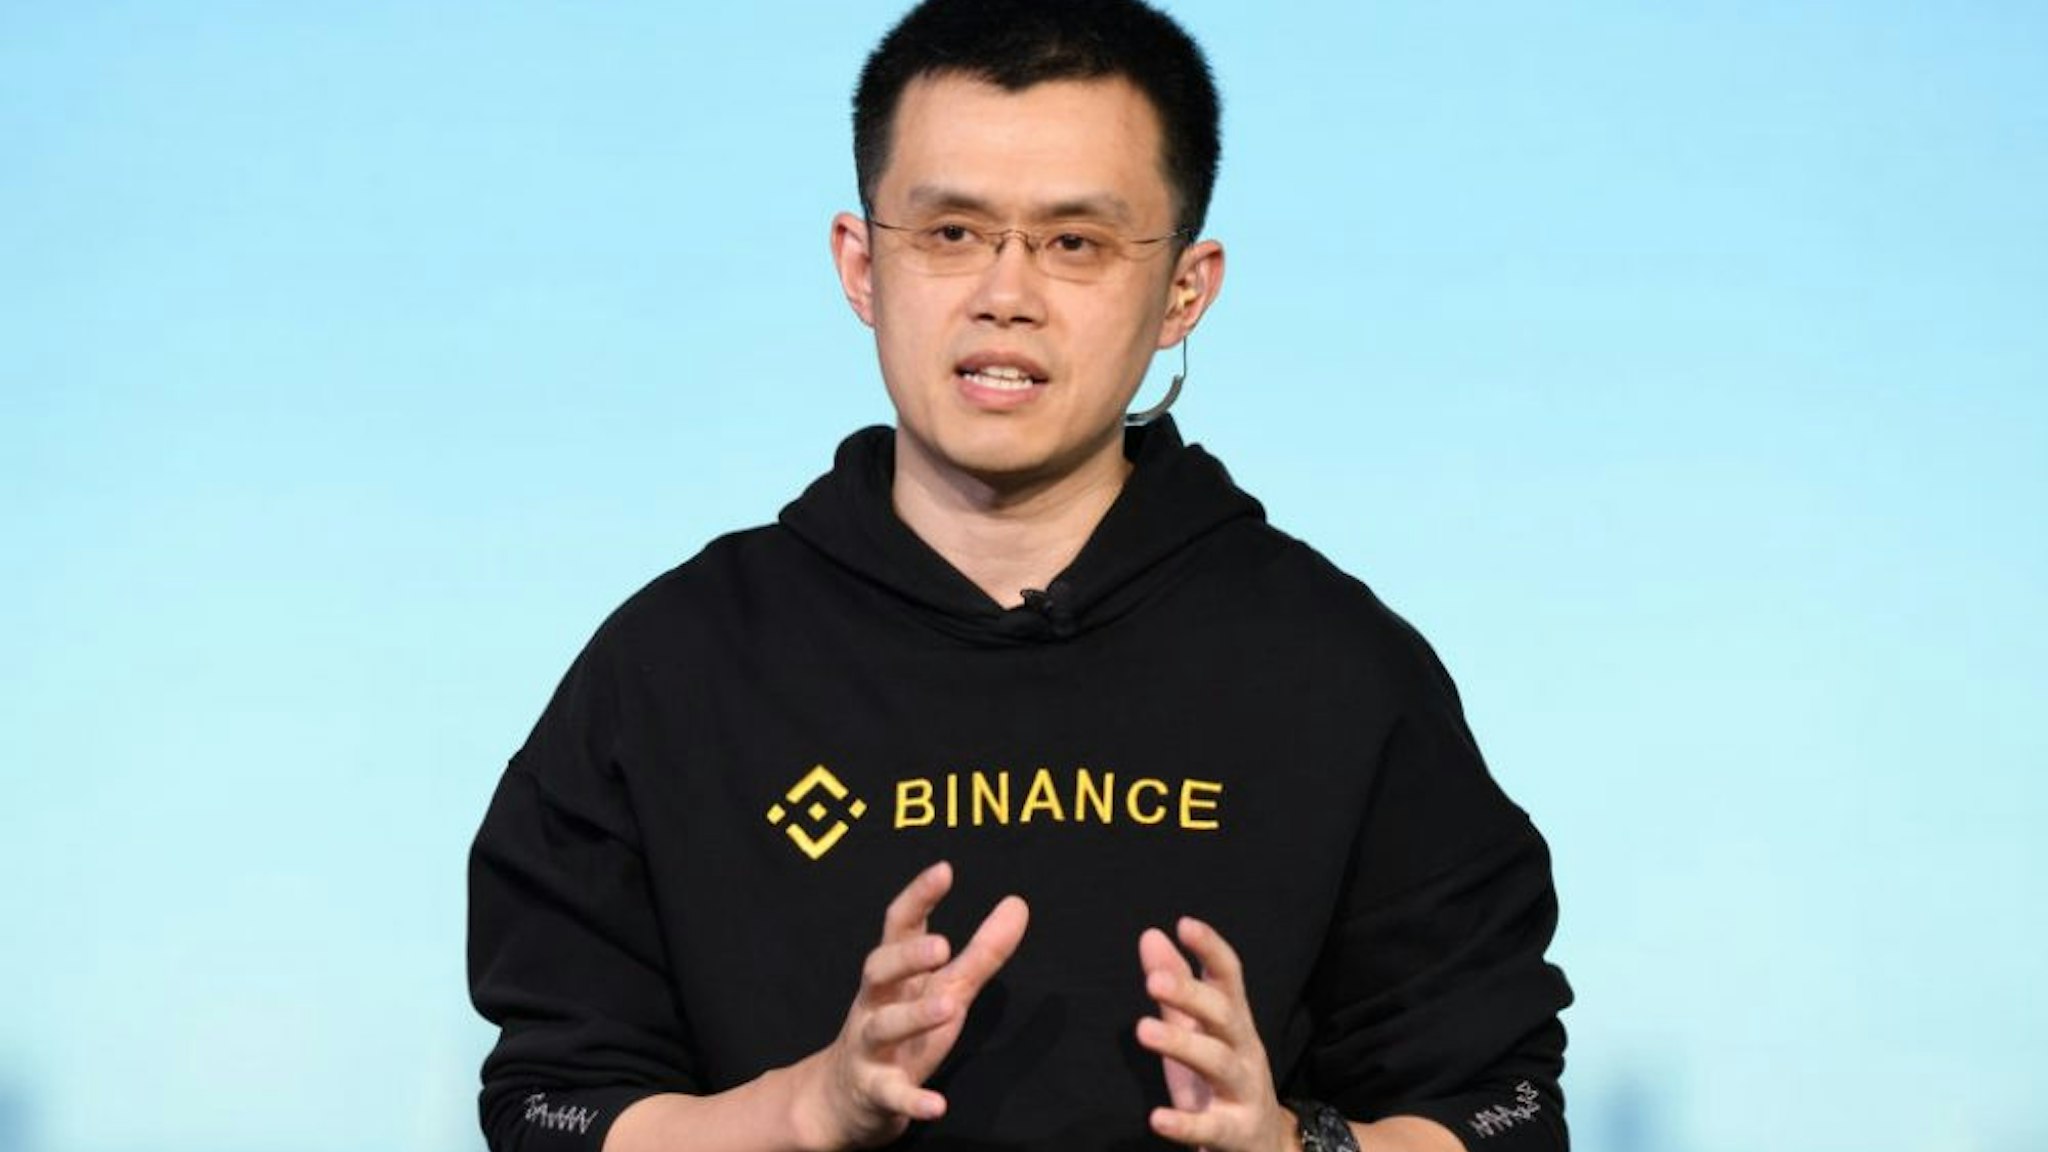 Zhao Changpeng, chief executive officer of Binance, speaks during a Bloomberg Television interview in Tokyo, Japan, on Thursday, Jan. 11, 2018. The worlds biggest cryptocurrency exchange keeps getting bigger. Binance.com is adding a couple of million registered users every week, with 240,000 people signing up in just an hour on Wednesday, said Zhao.